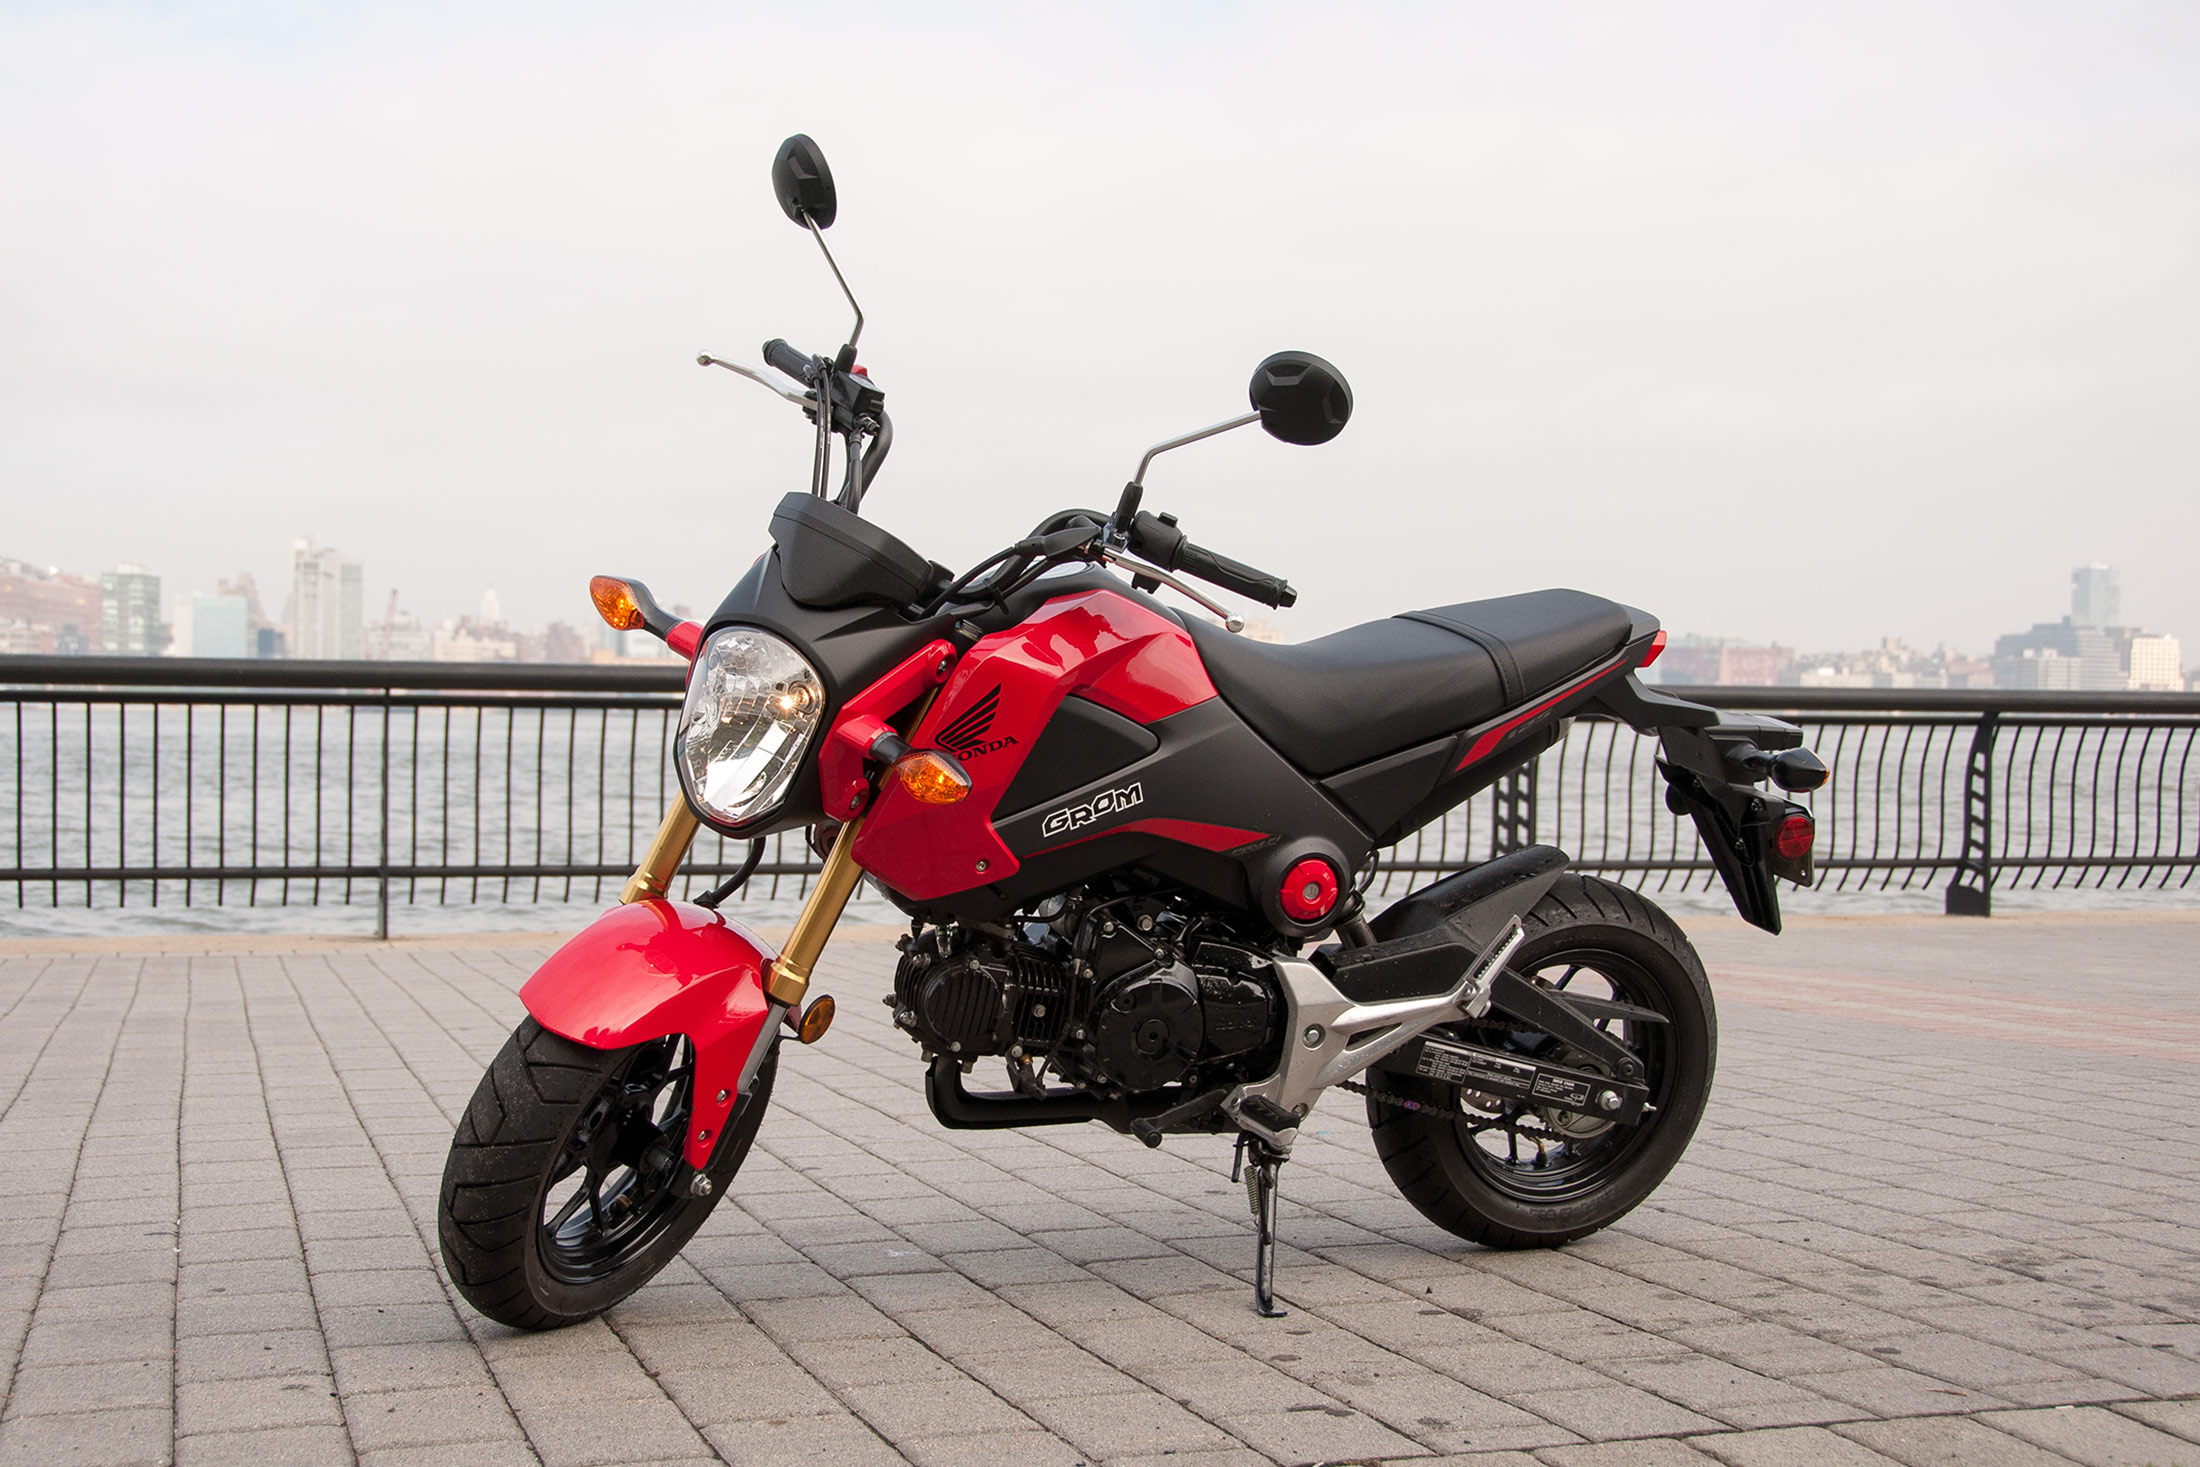 Honda Grom Review: Big Thrills, Tiny Motorcycle - Bloomberg